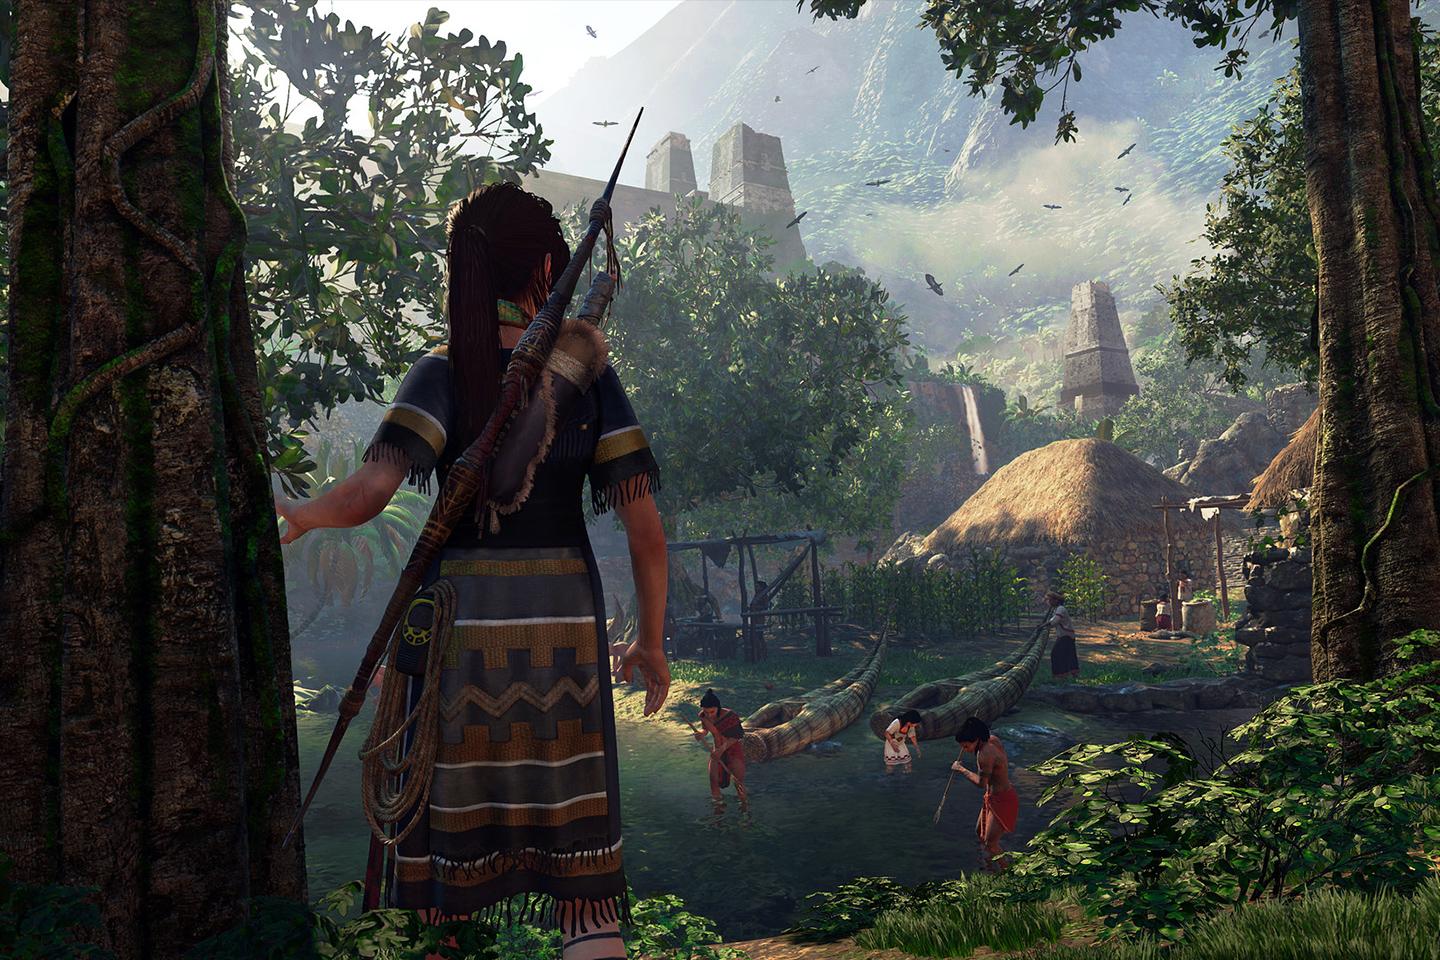 A tranquil scene from a Tomb Raider game showing Lara Croft with a bow, overlooking a village with thatched huts amidst a lush jungle, under the shadow of a mysterious stone structure.